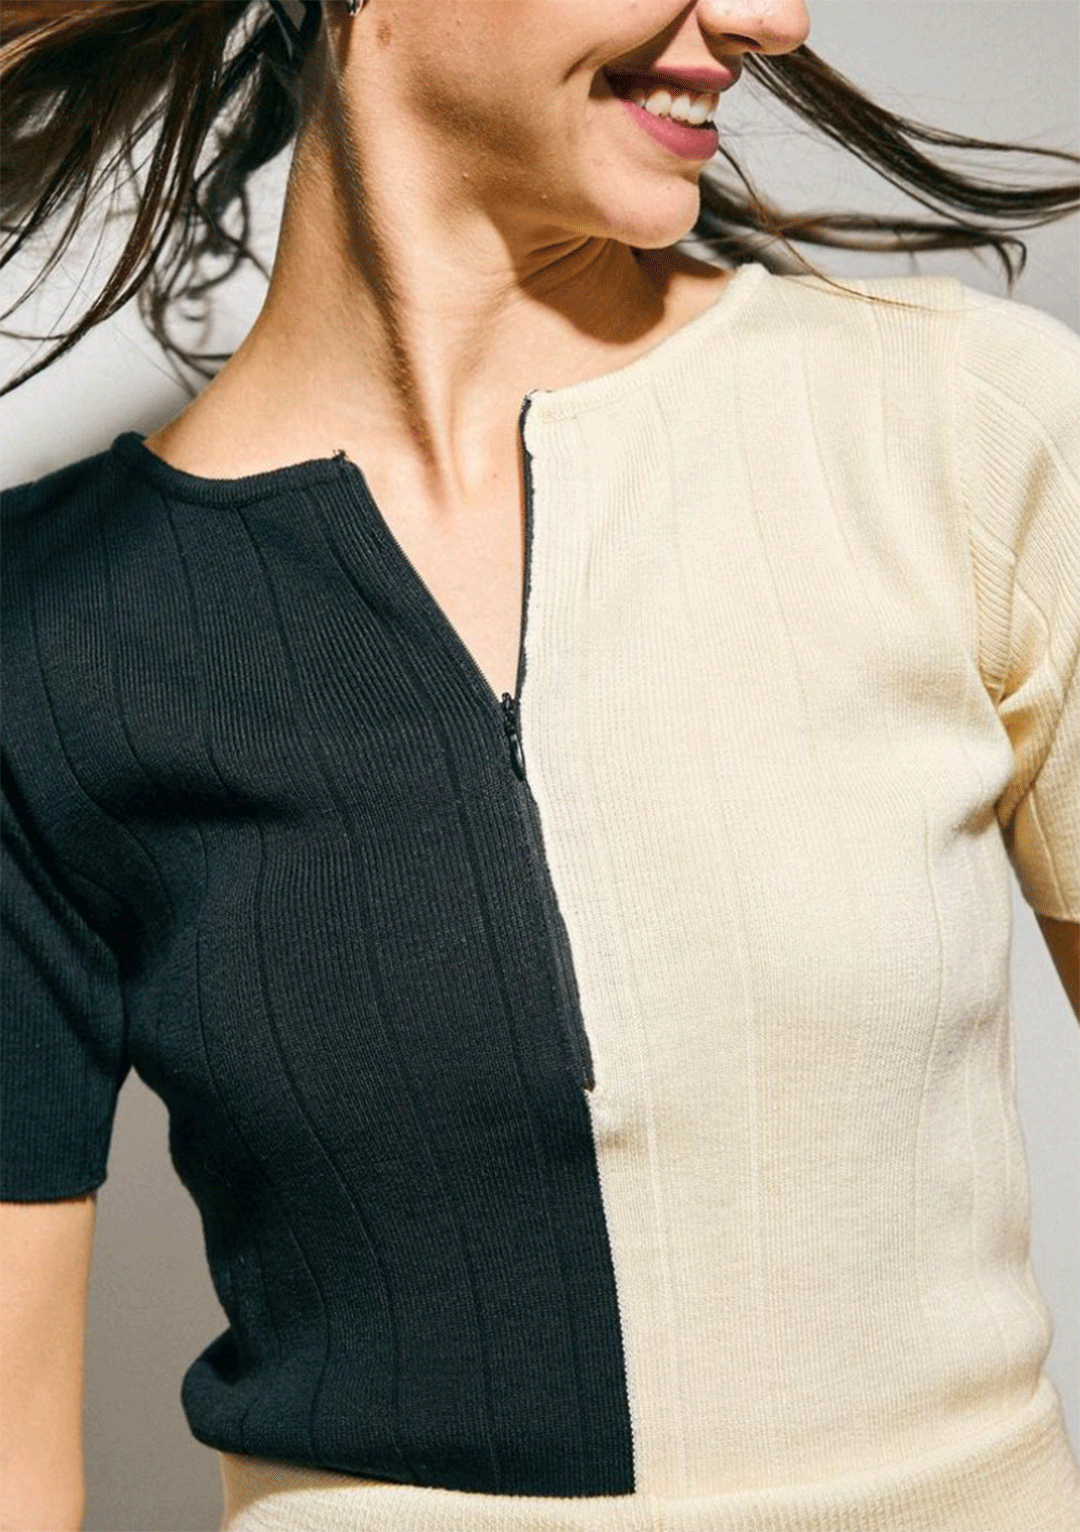 RALLY MOVEMENT ZIPPED UP KNIT TOP